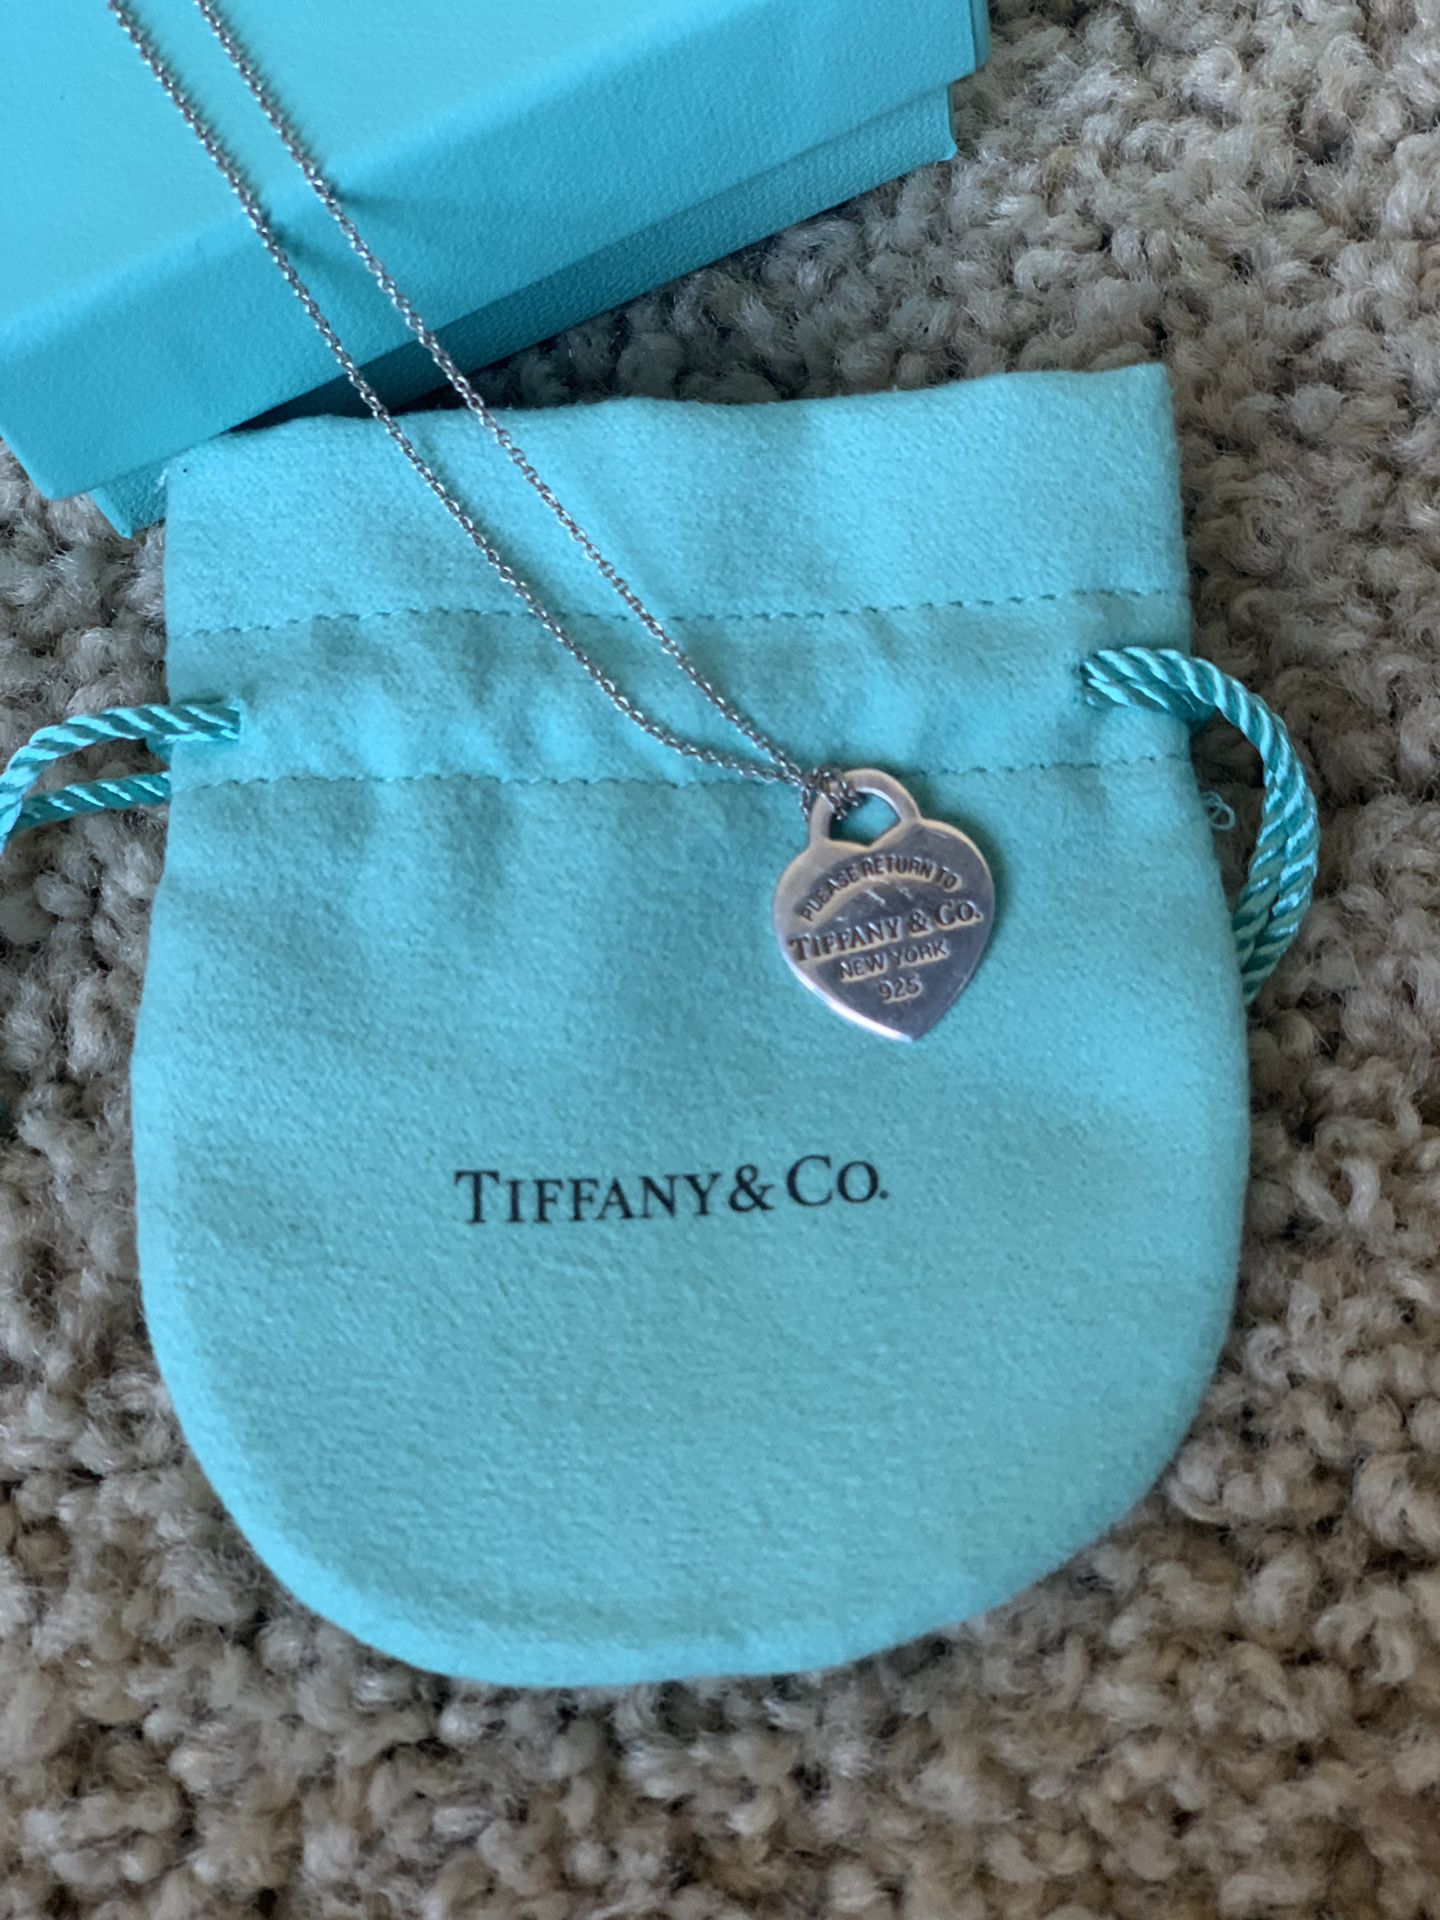 Tiffany and co necklace.